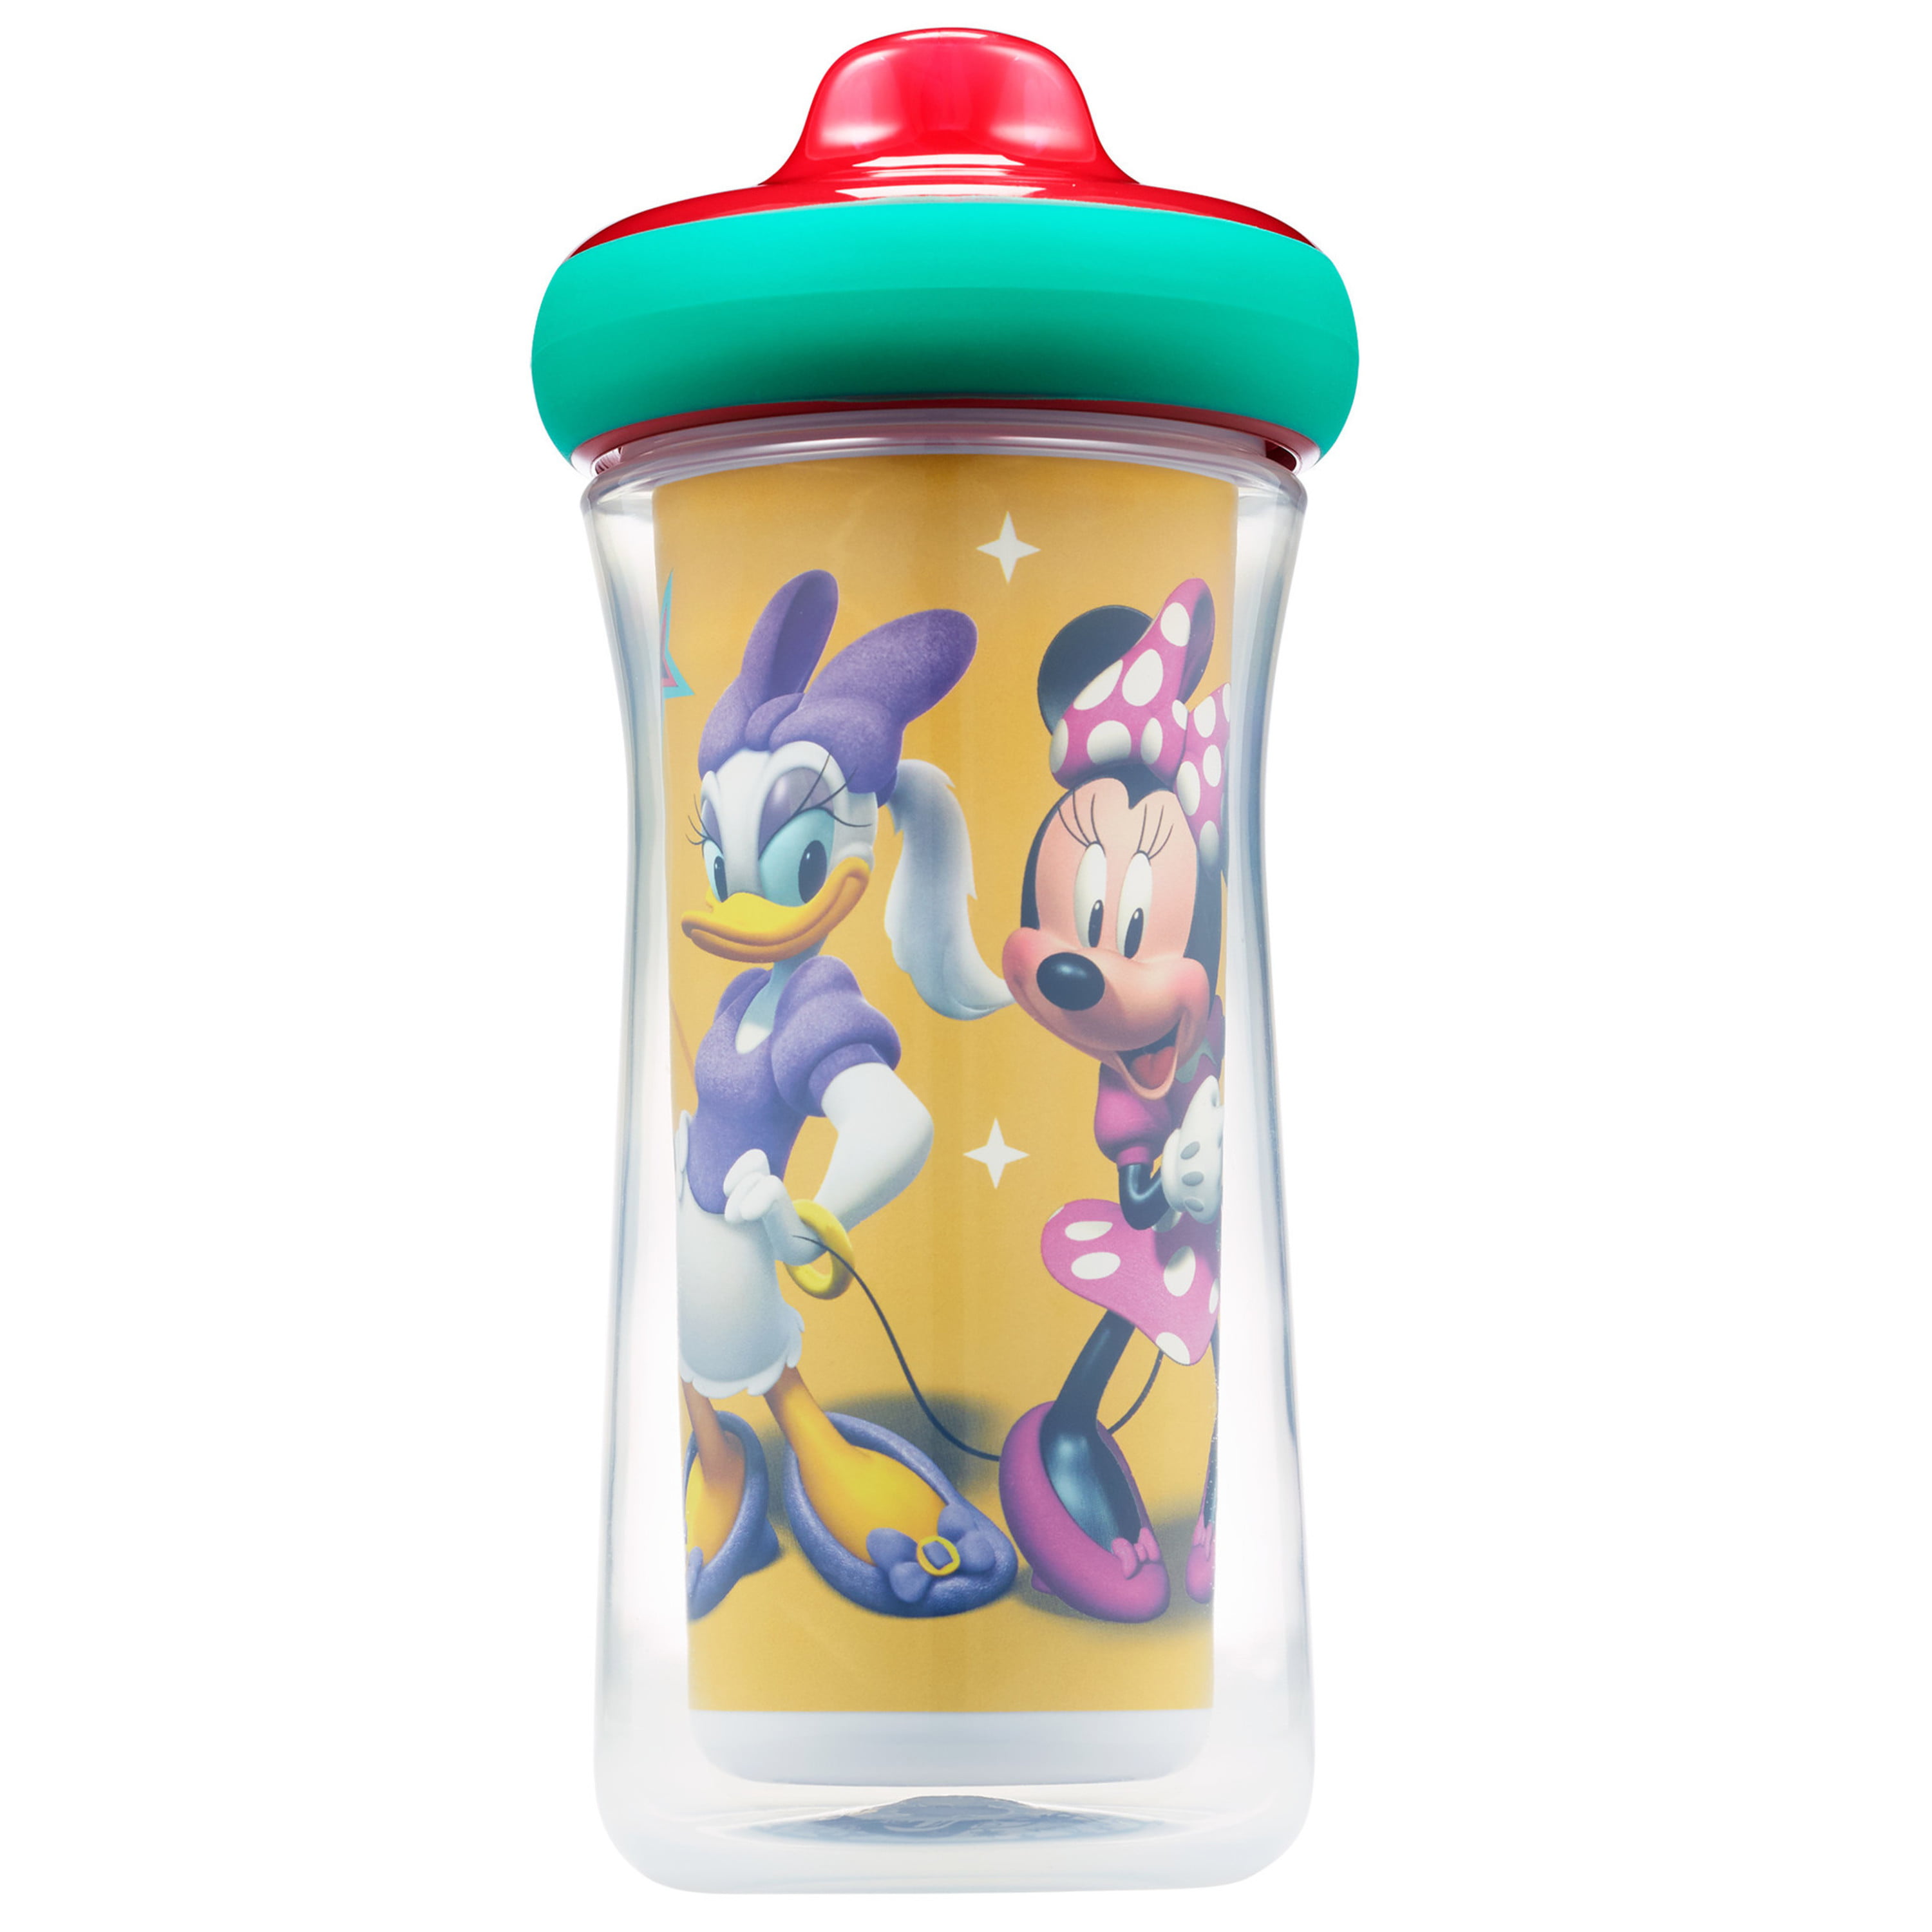 Disney Mickey Mouse Insulated Sippy Cup 9 oz - 2pk